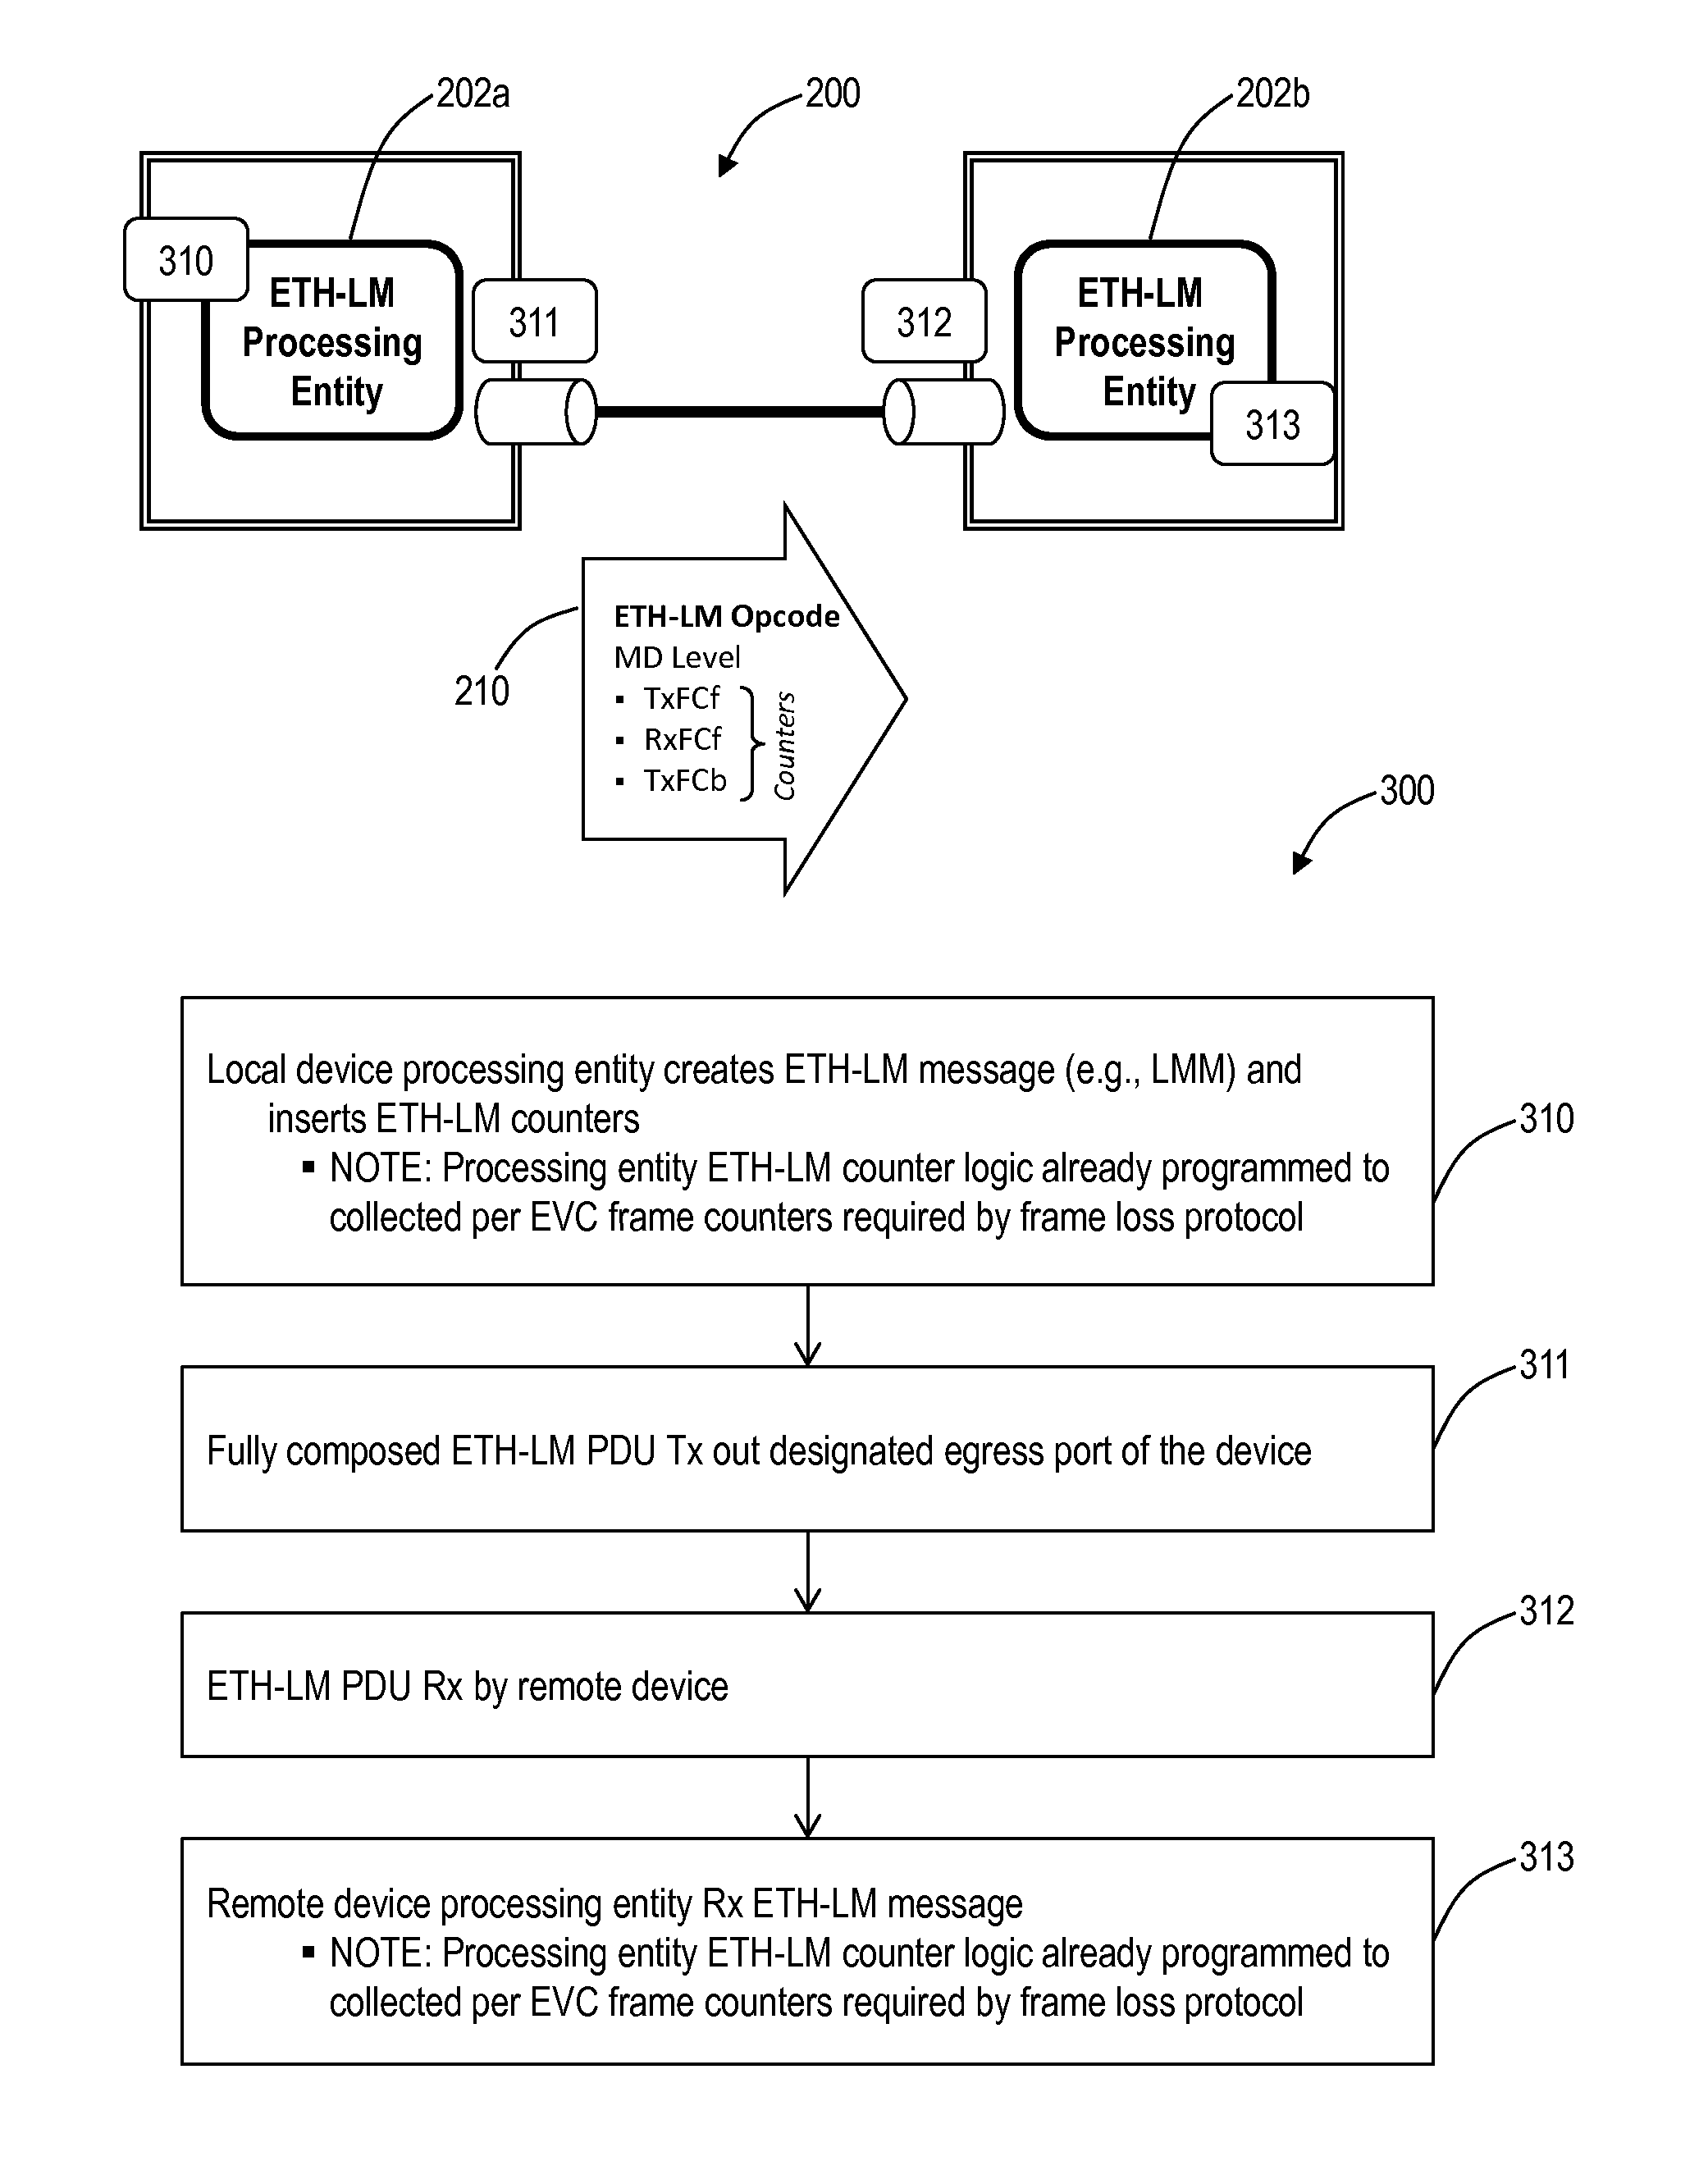 Systems and methods for operational simplification of carrier ethernet networks